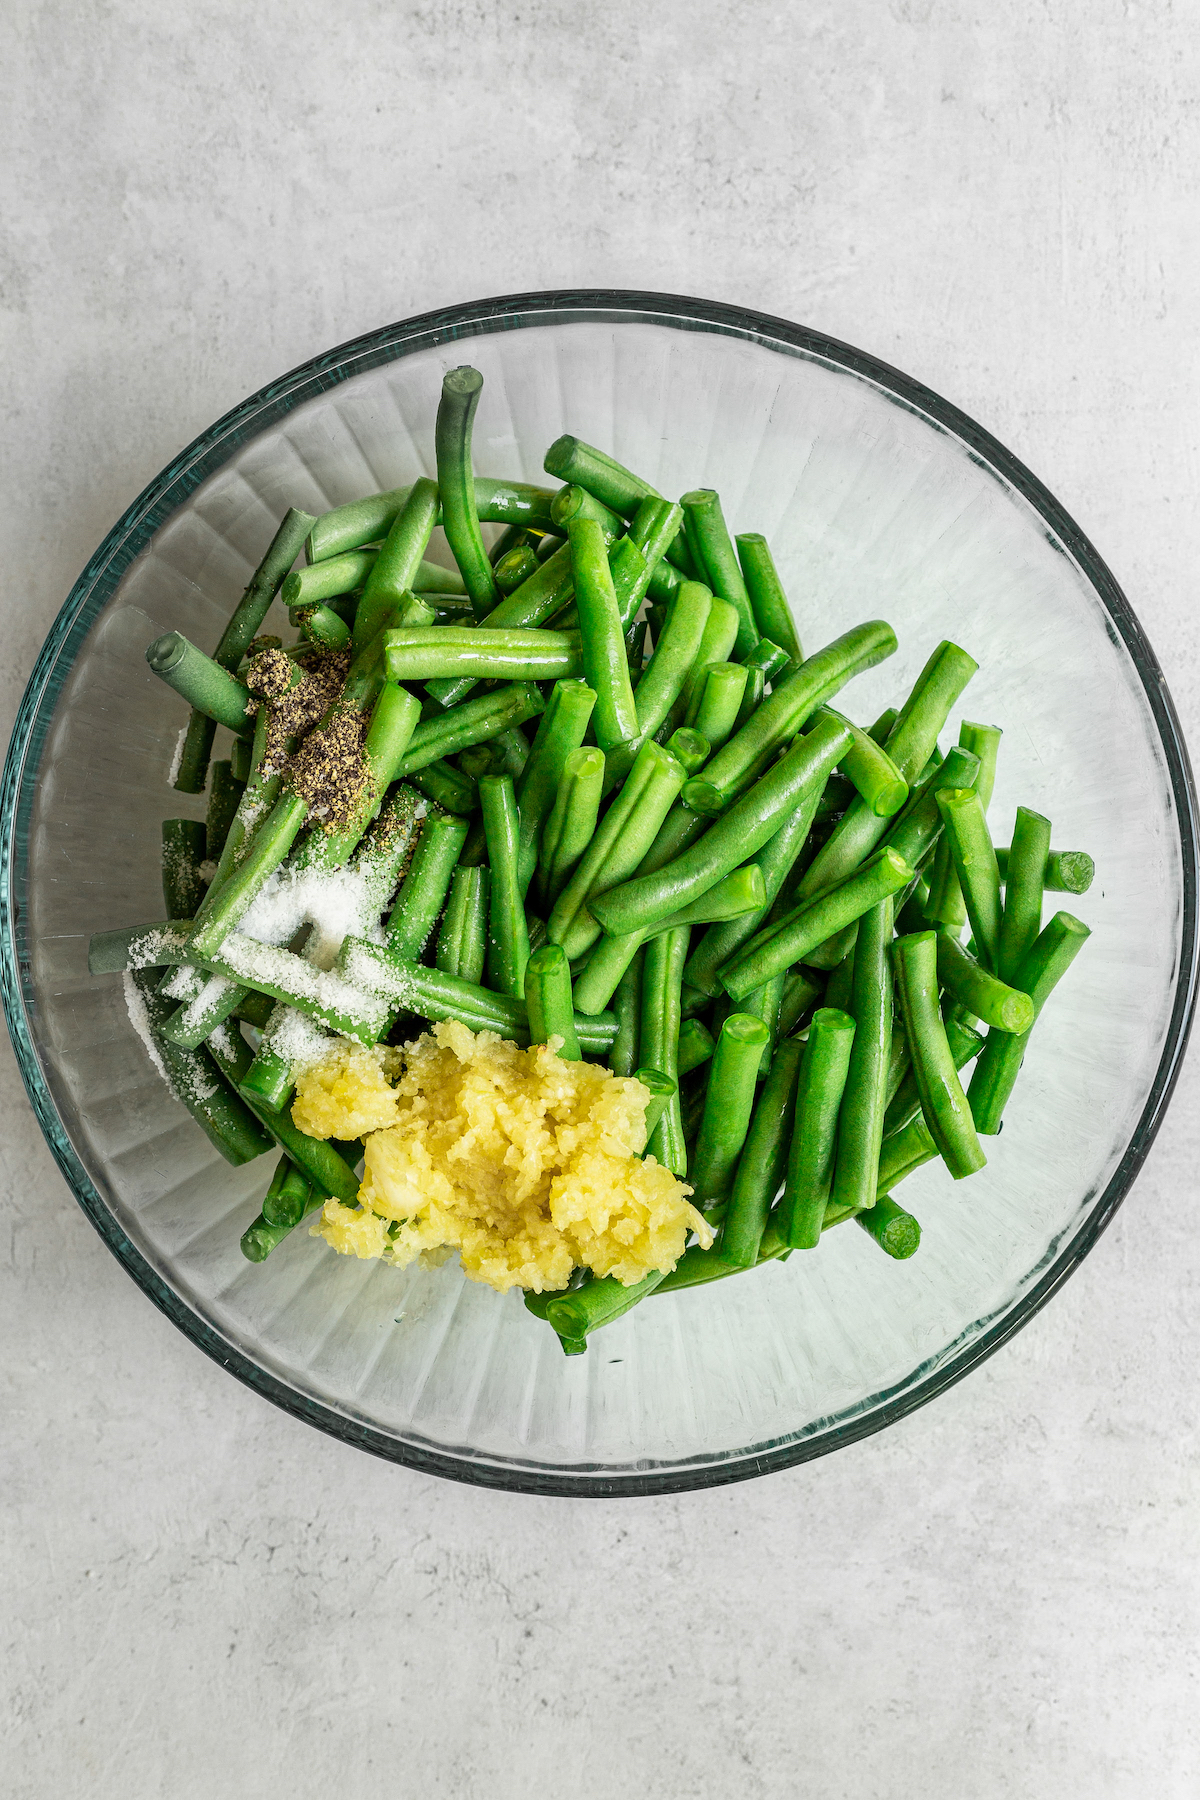 Green beans, garlic, and other ingredients in a glass mixing bowl.